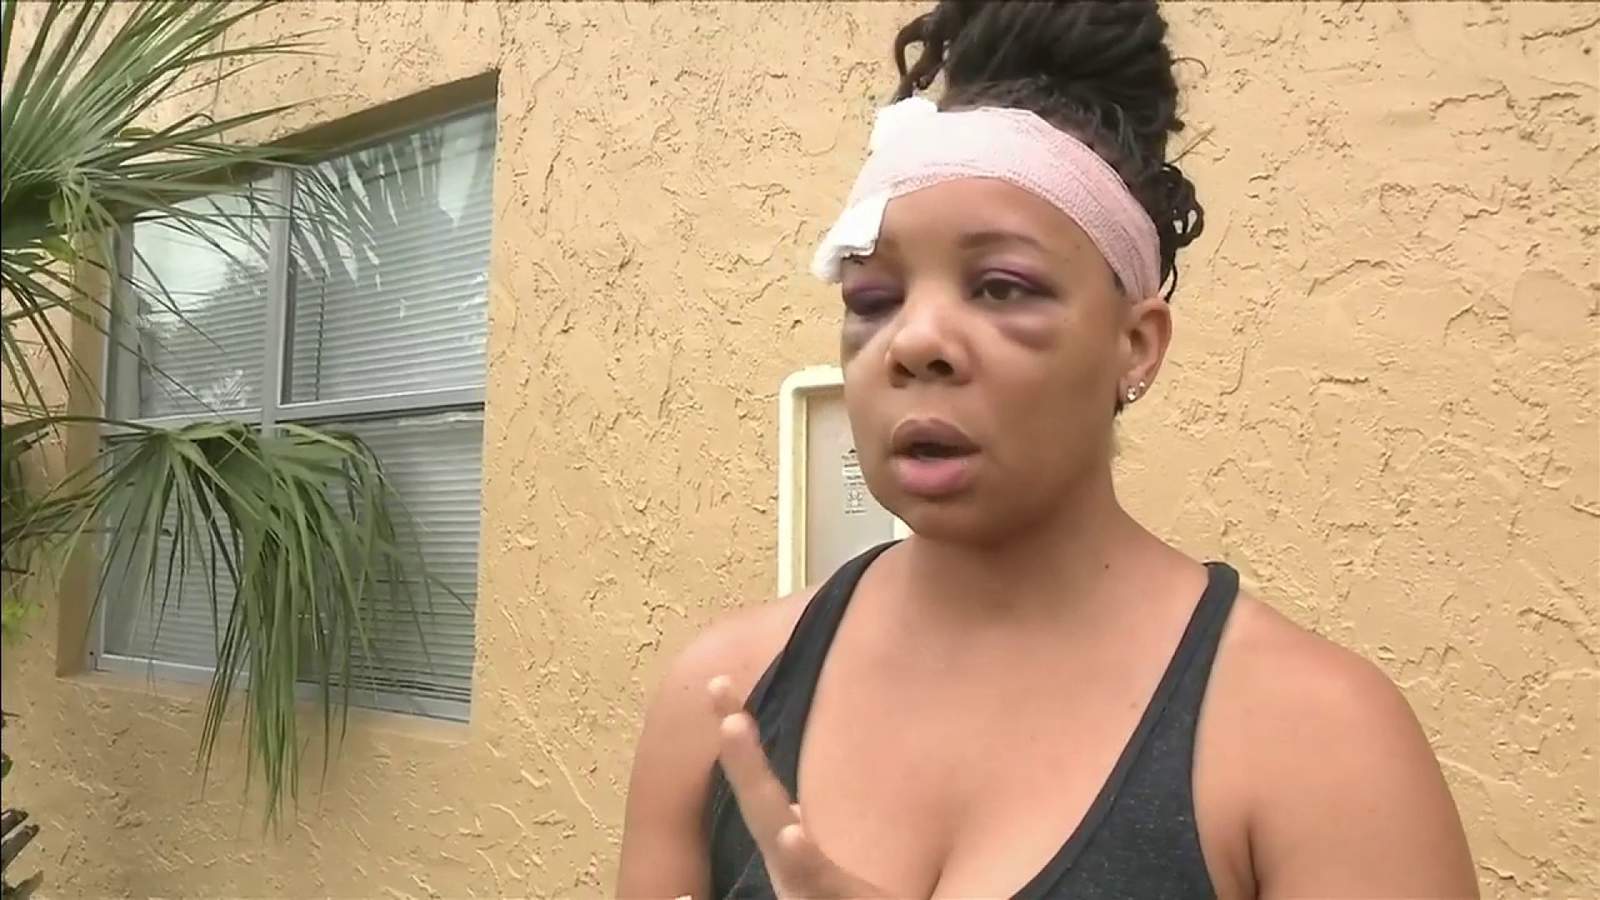 Women denounce Fort Lauderdale officers’ violence during protests against police brutality